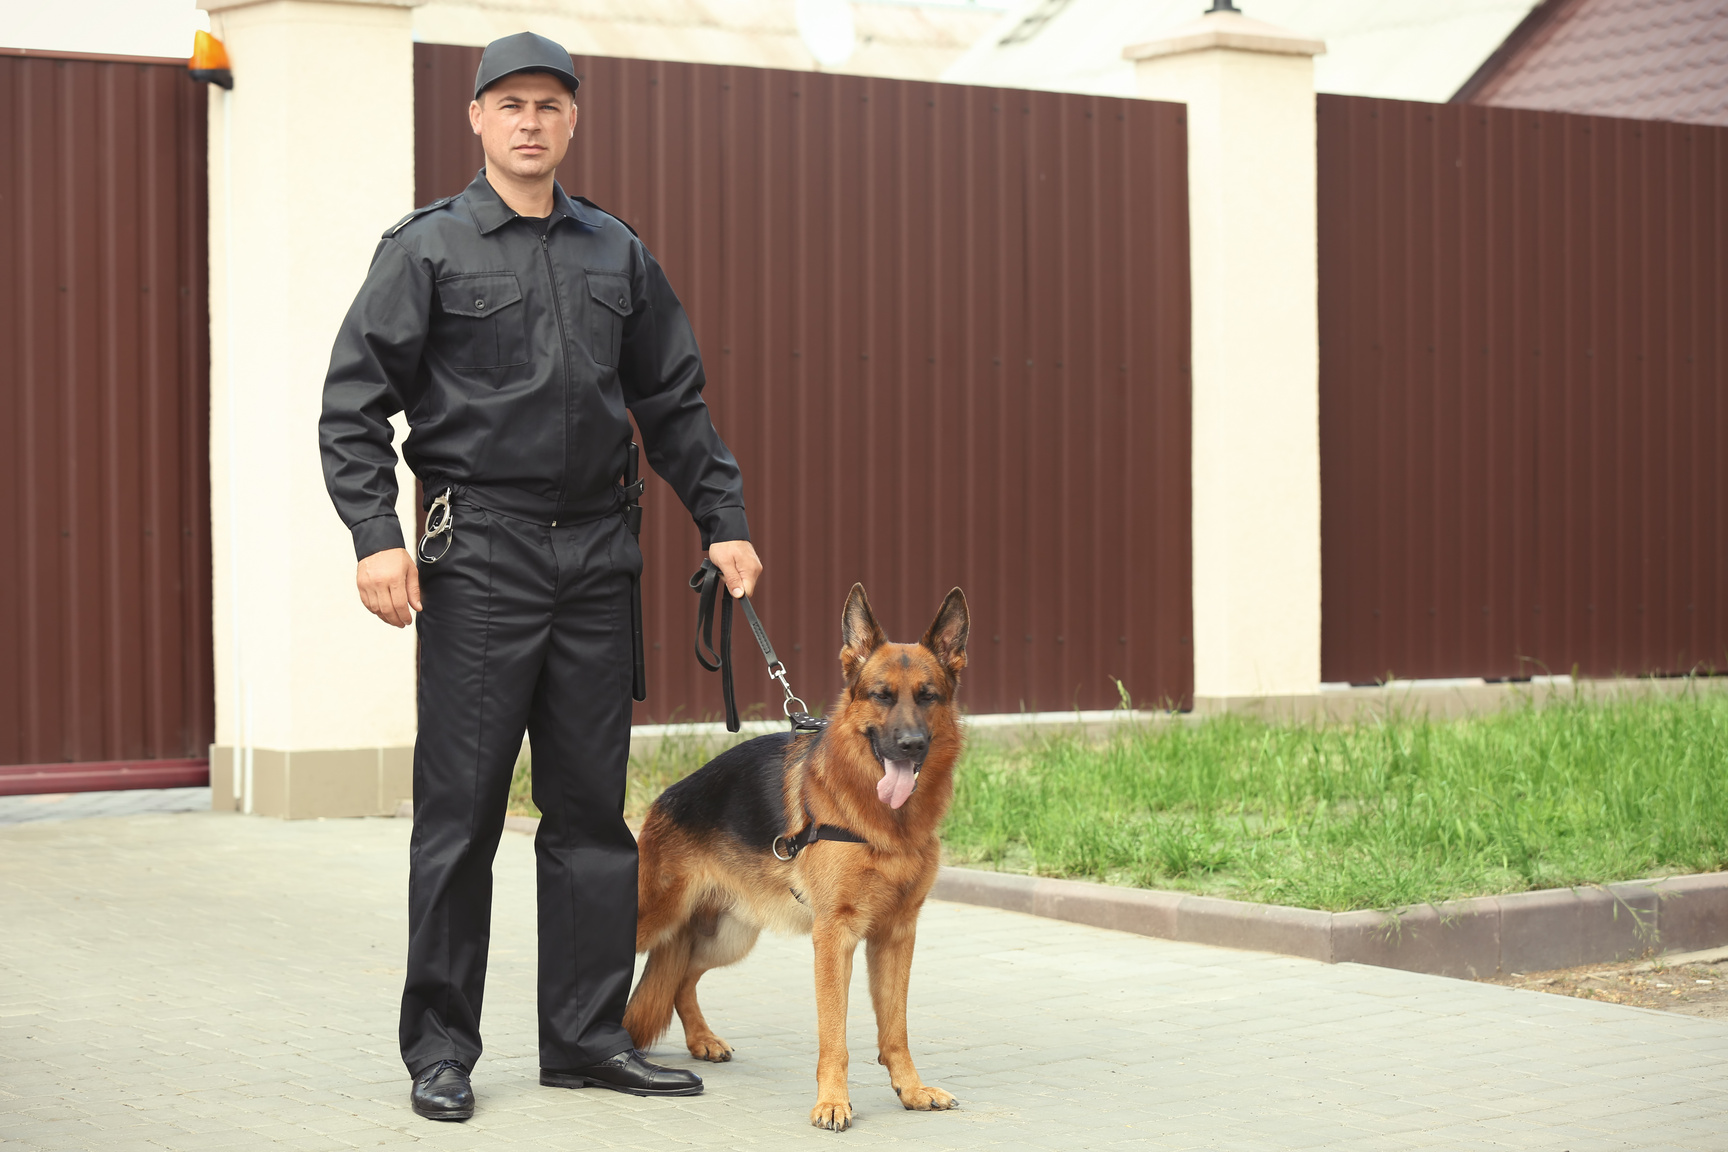 Security Guard with Dog